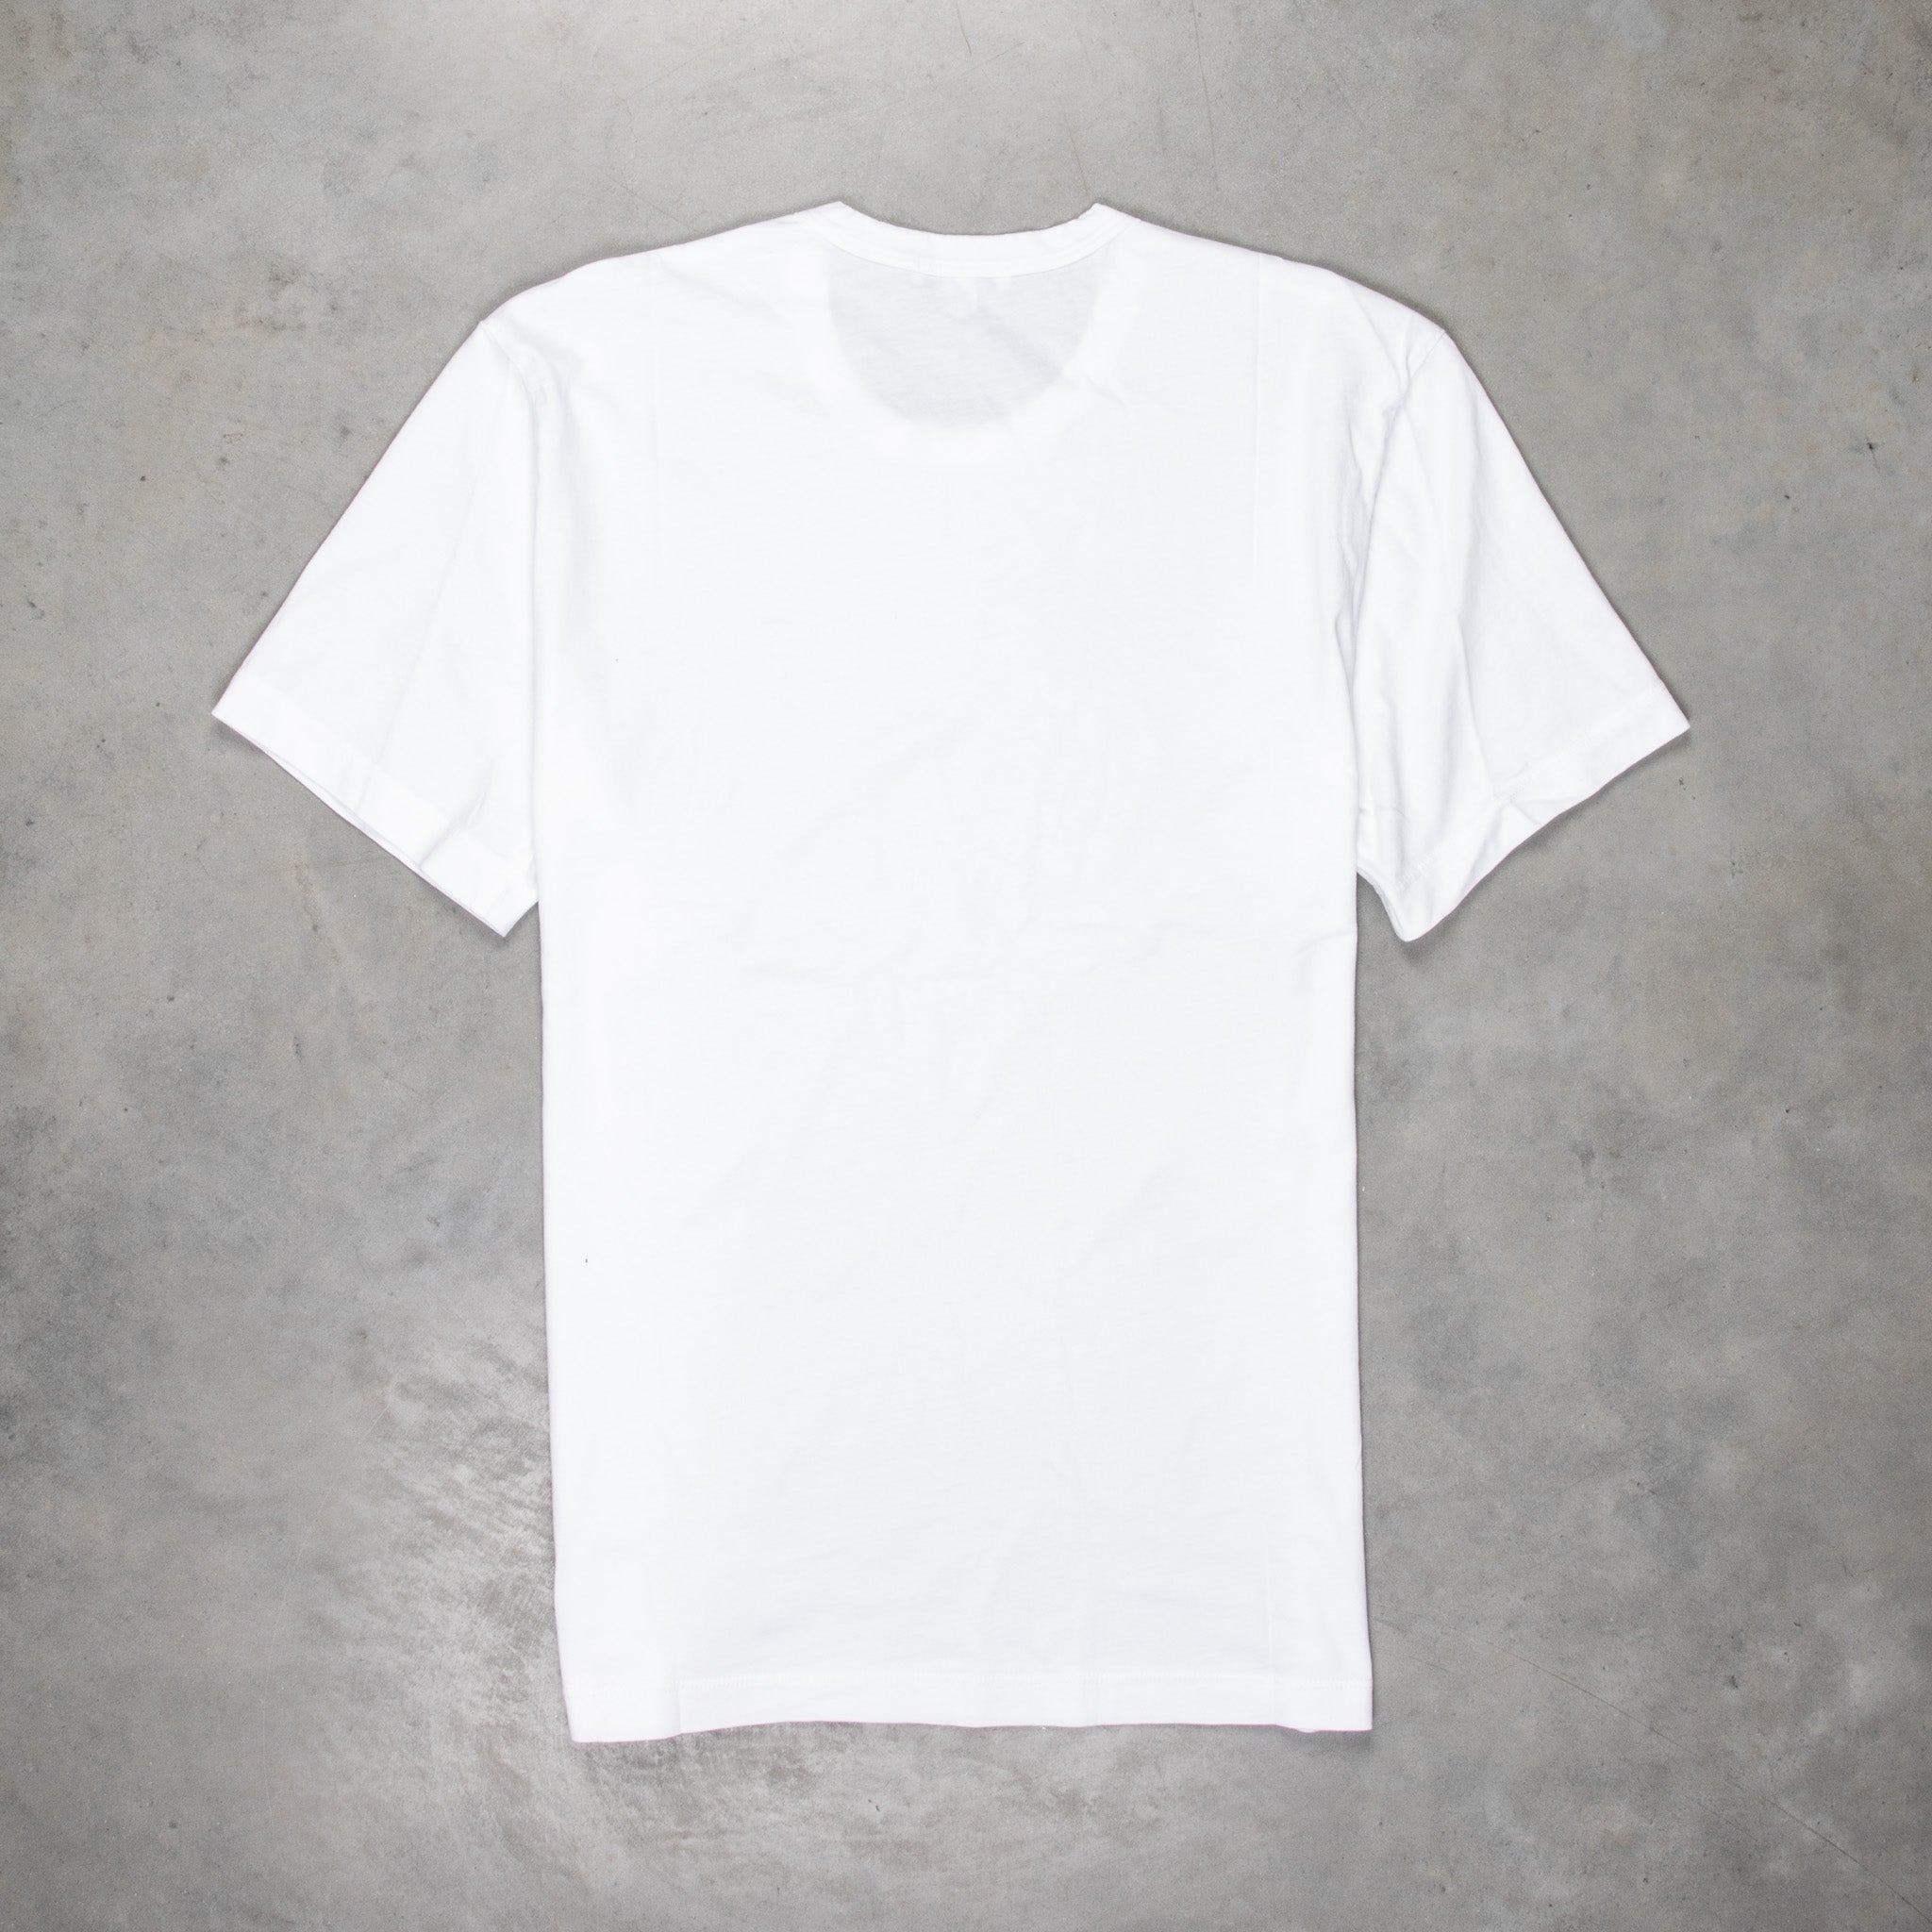 James Perse Crew neck tee white – Frans Boone Store